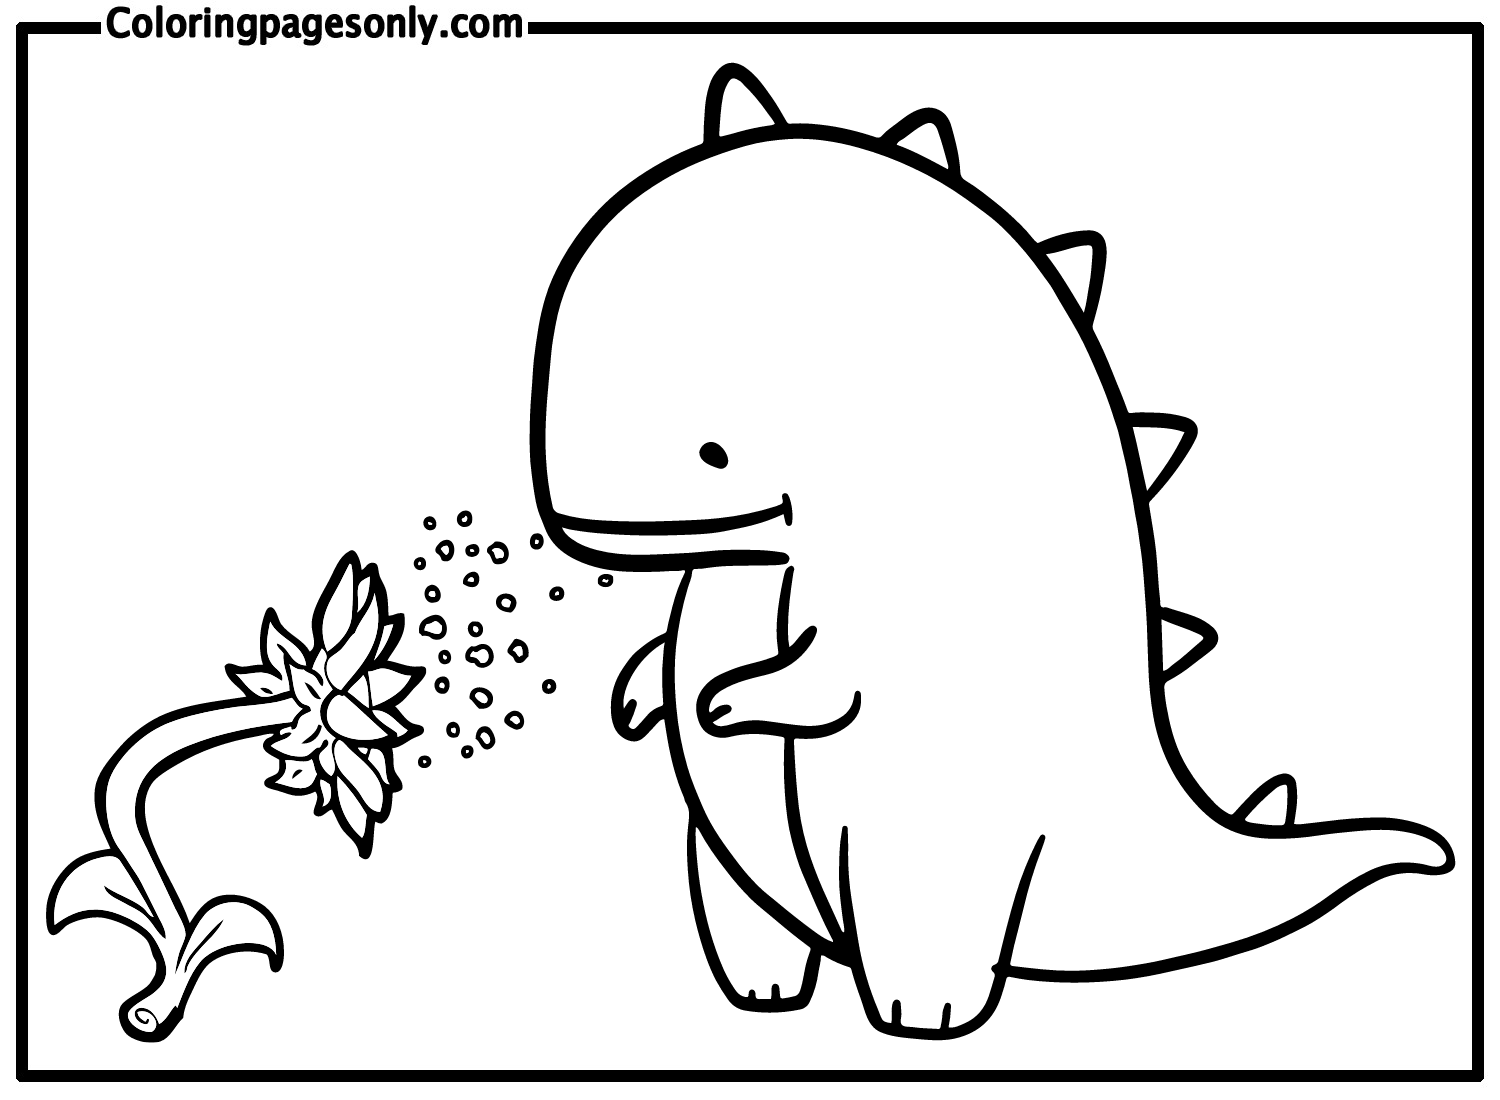 Adovable Dinosaur With Flower Coloring Pages